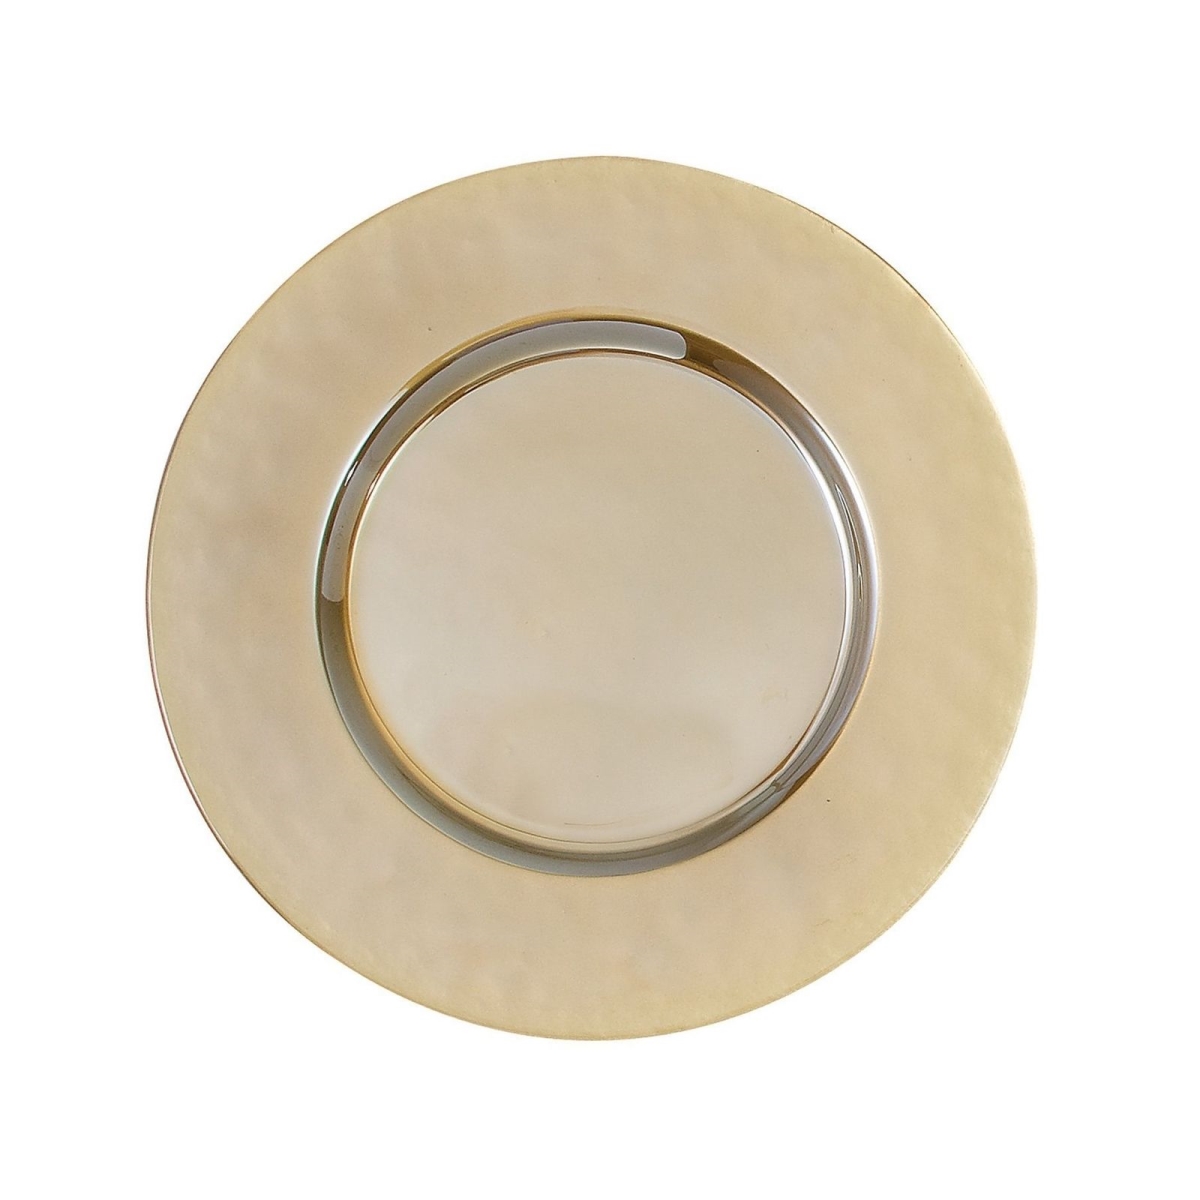 Picture of Leeber 31131 Luster Chargers Plate, Gold - Set of 4